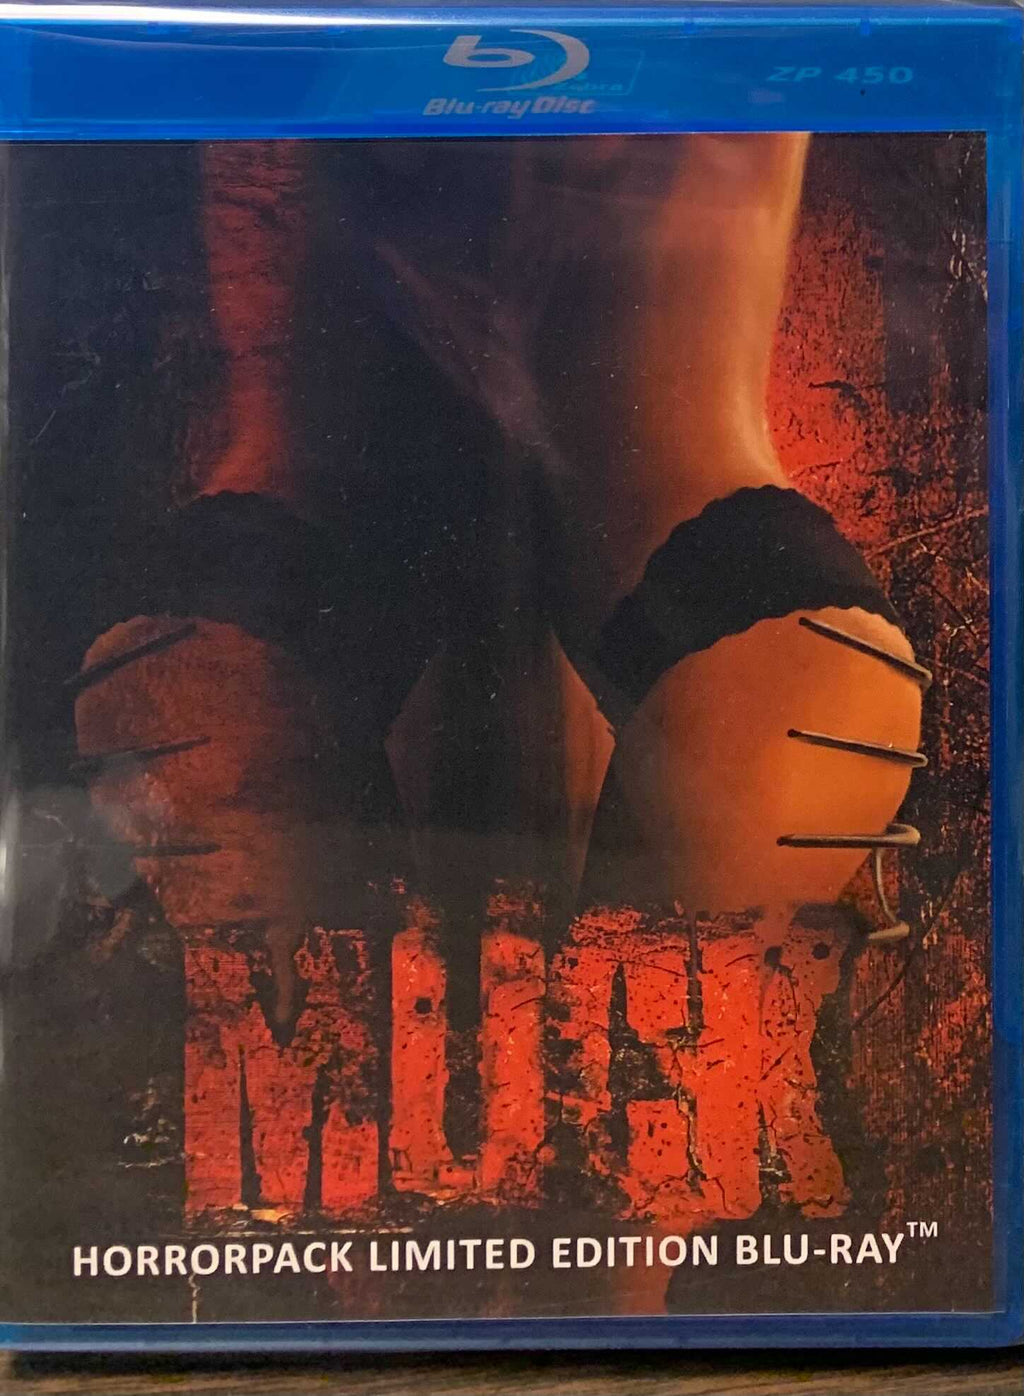 Muck - HorrorPack Limited Edition Blu-ray #58